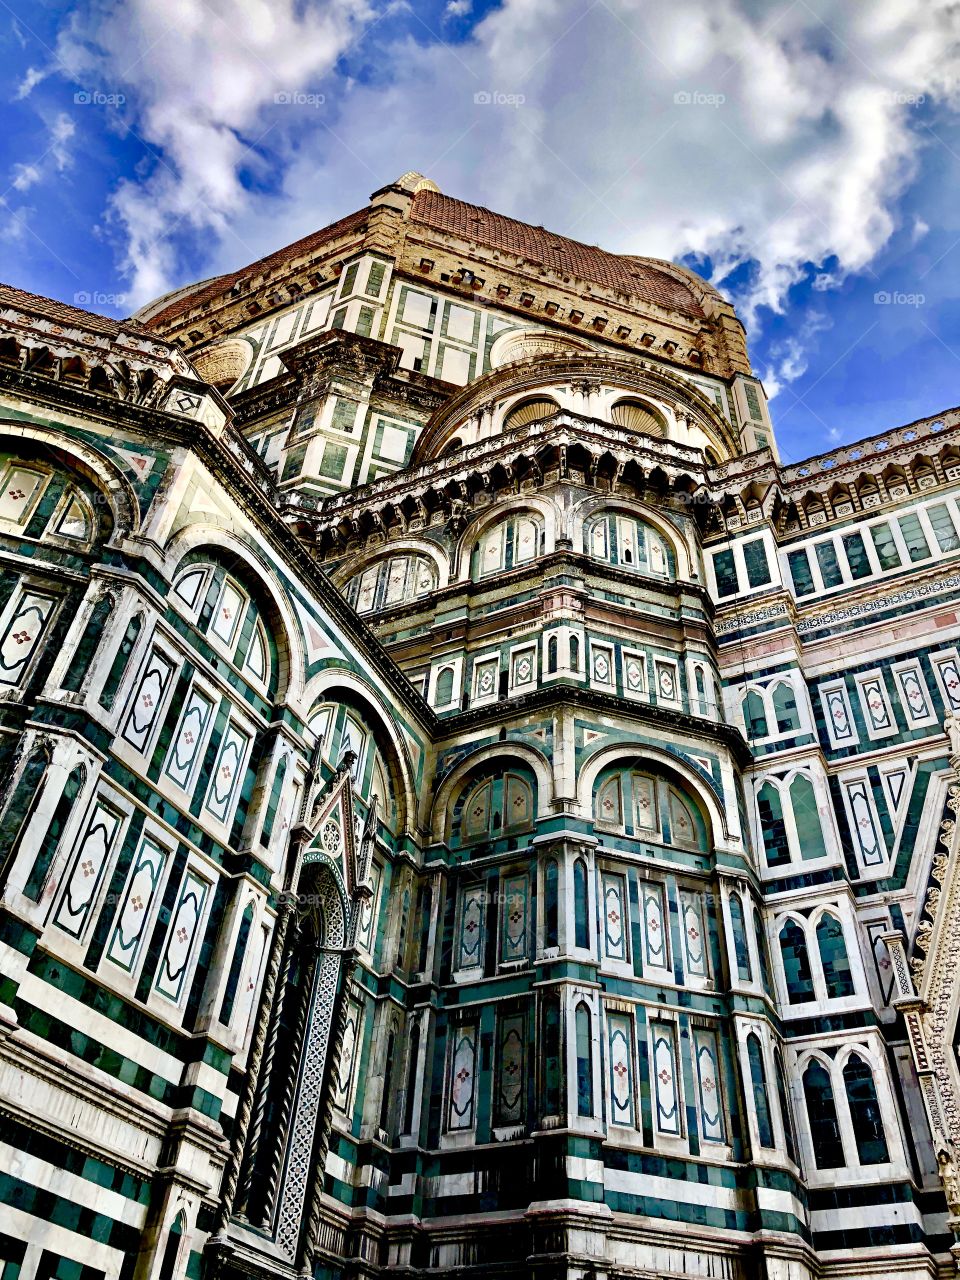 Looking up at the Duomo in Florence Italy 